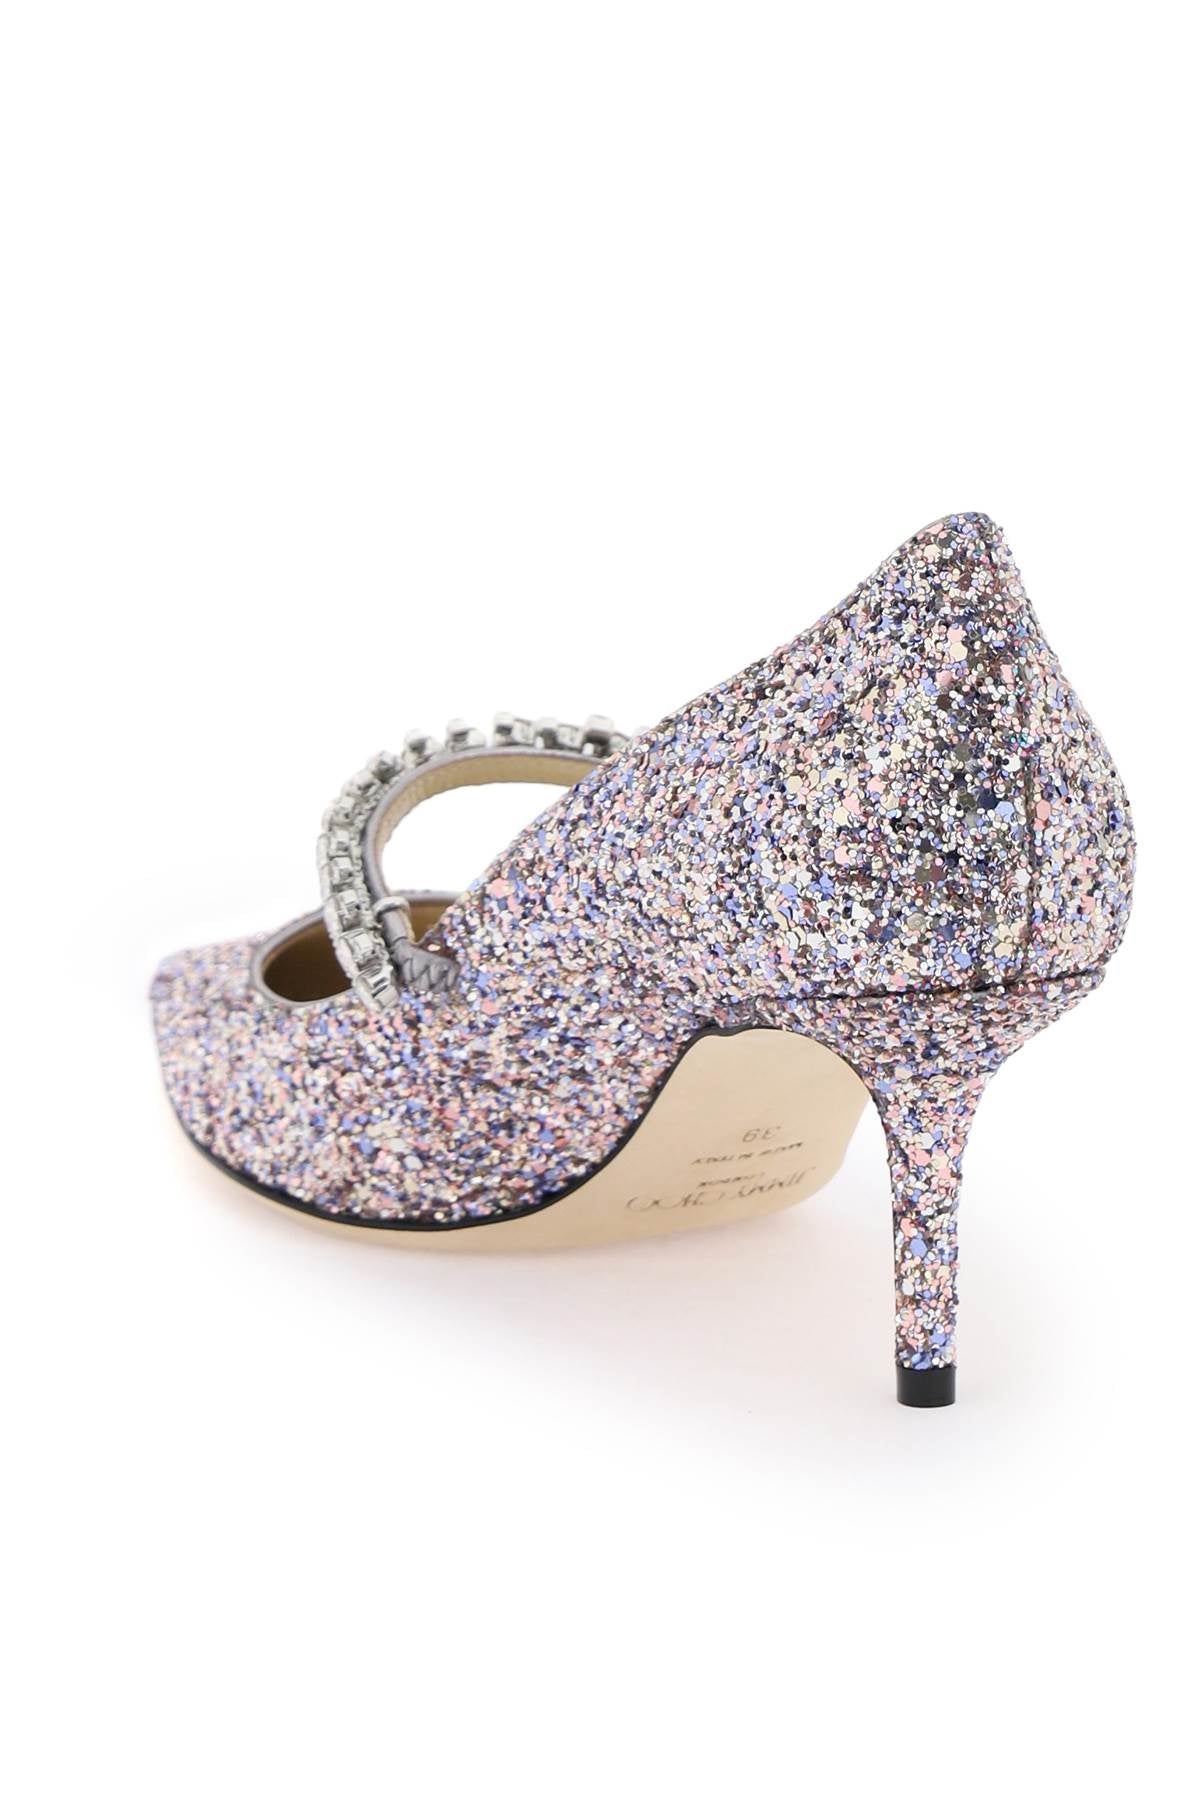 JIMMY CHOO Glittery Pumps with Crystal Strap